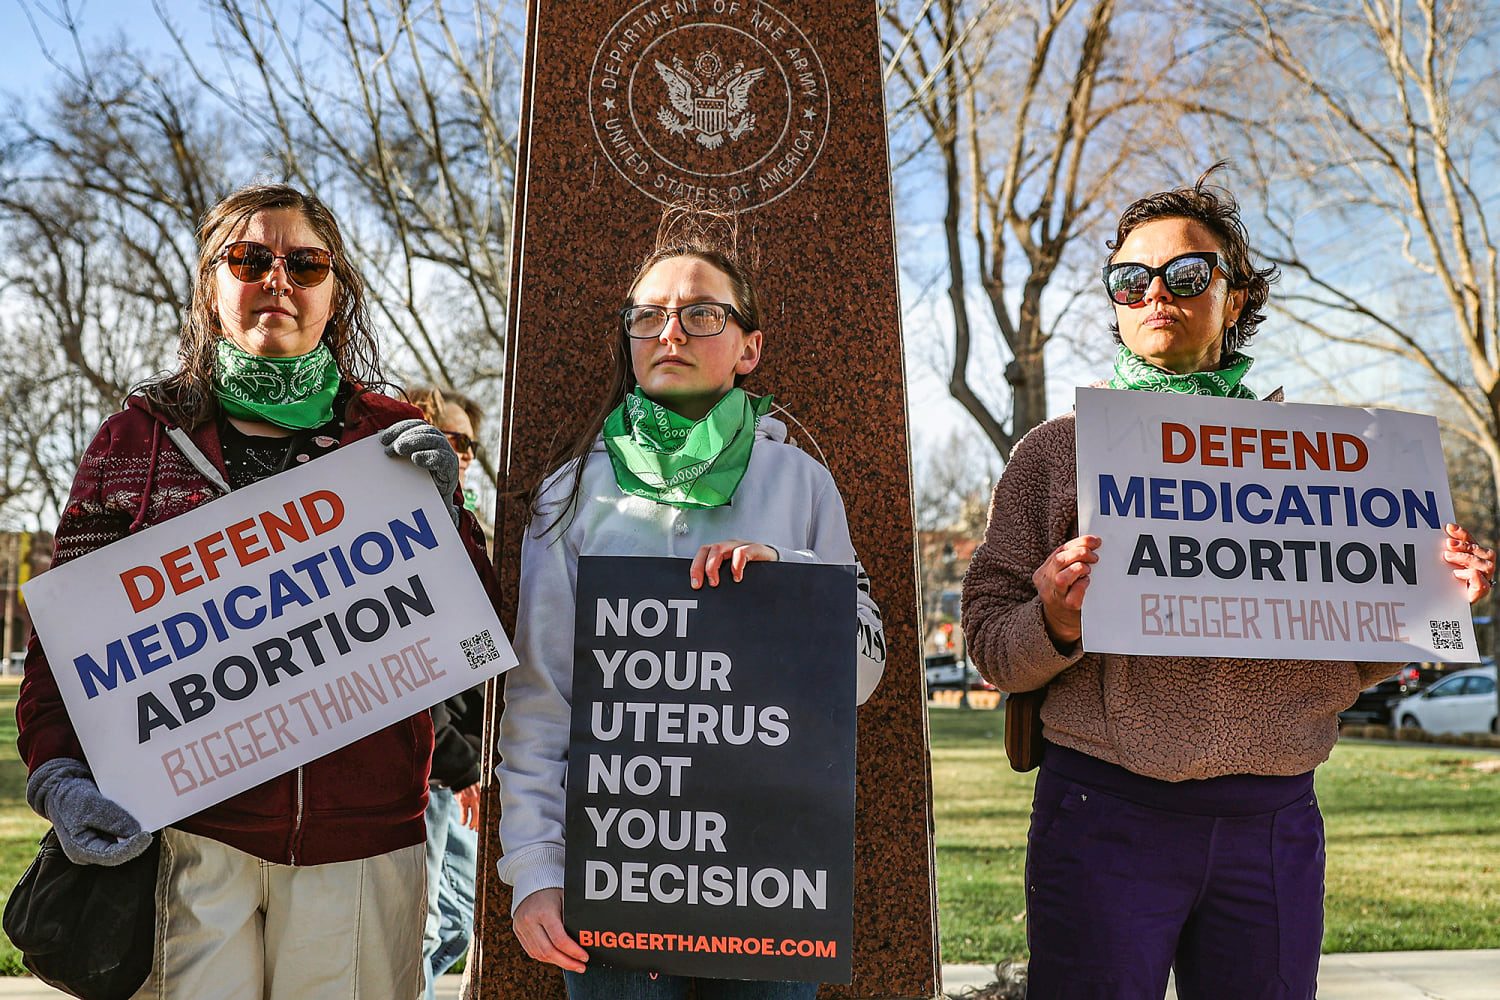 A ‘dangerous precedent’: Doctors and patient advocates fear restricted access to abortion pill